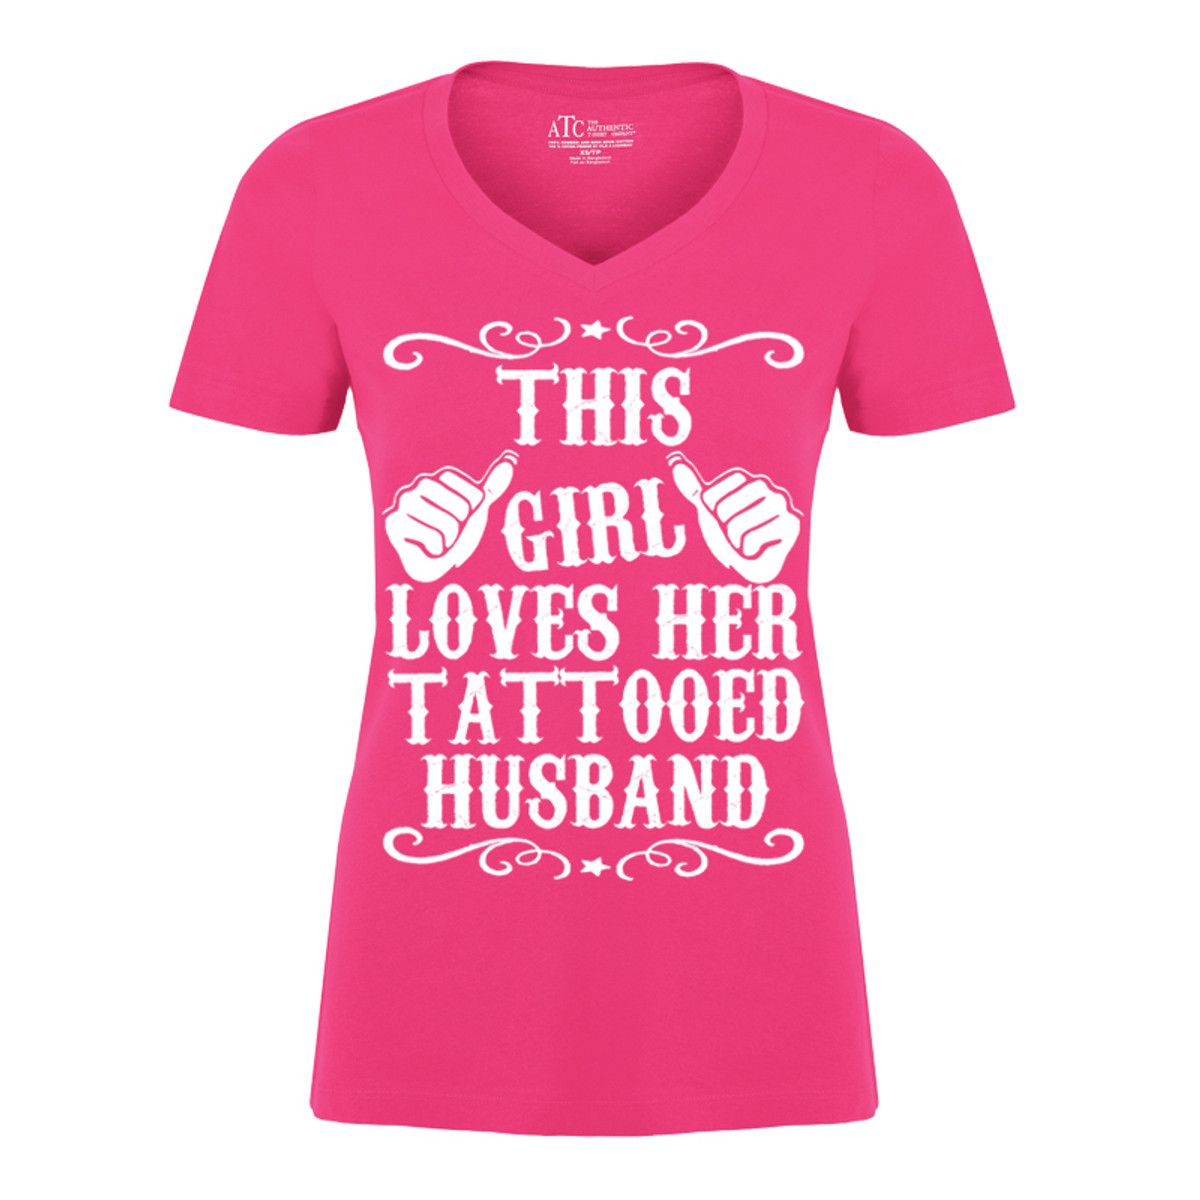 Women's This Girl Loves Her Tattooed Husband - Tshirt - The Inked Boys Shop